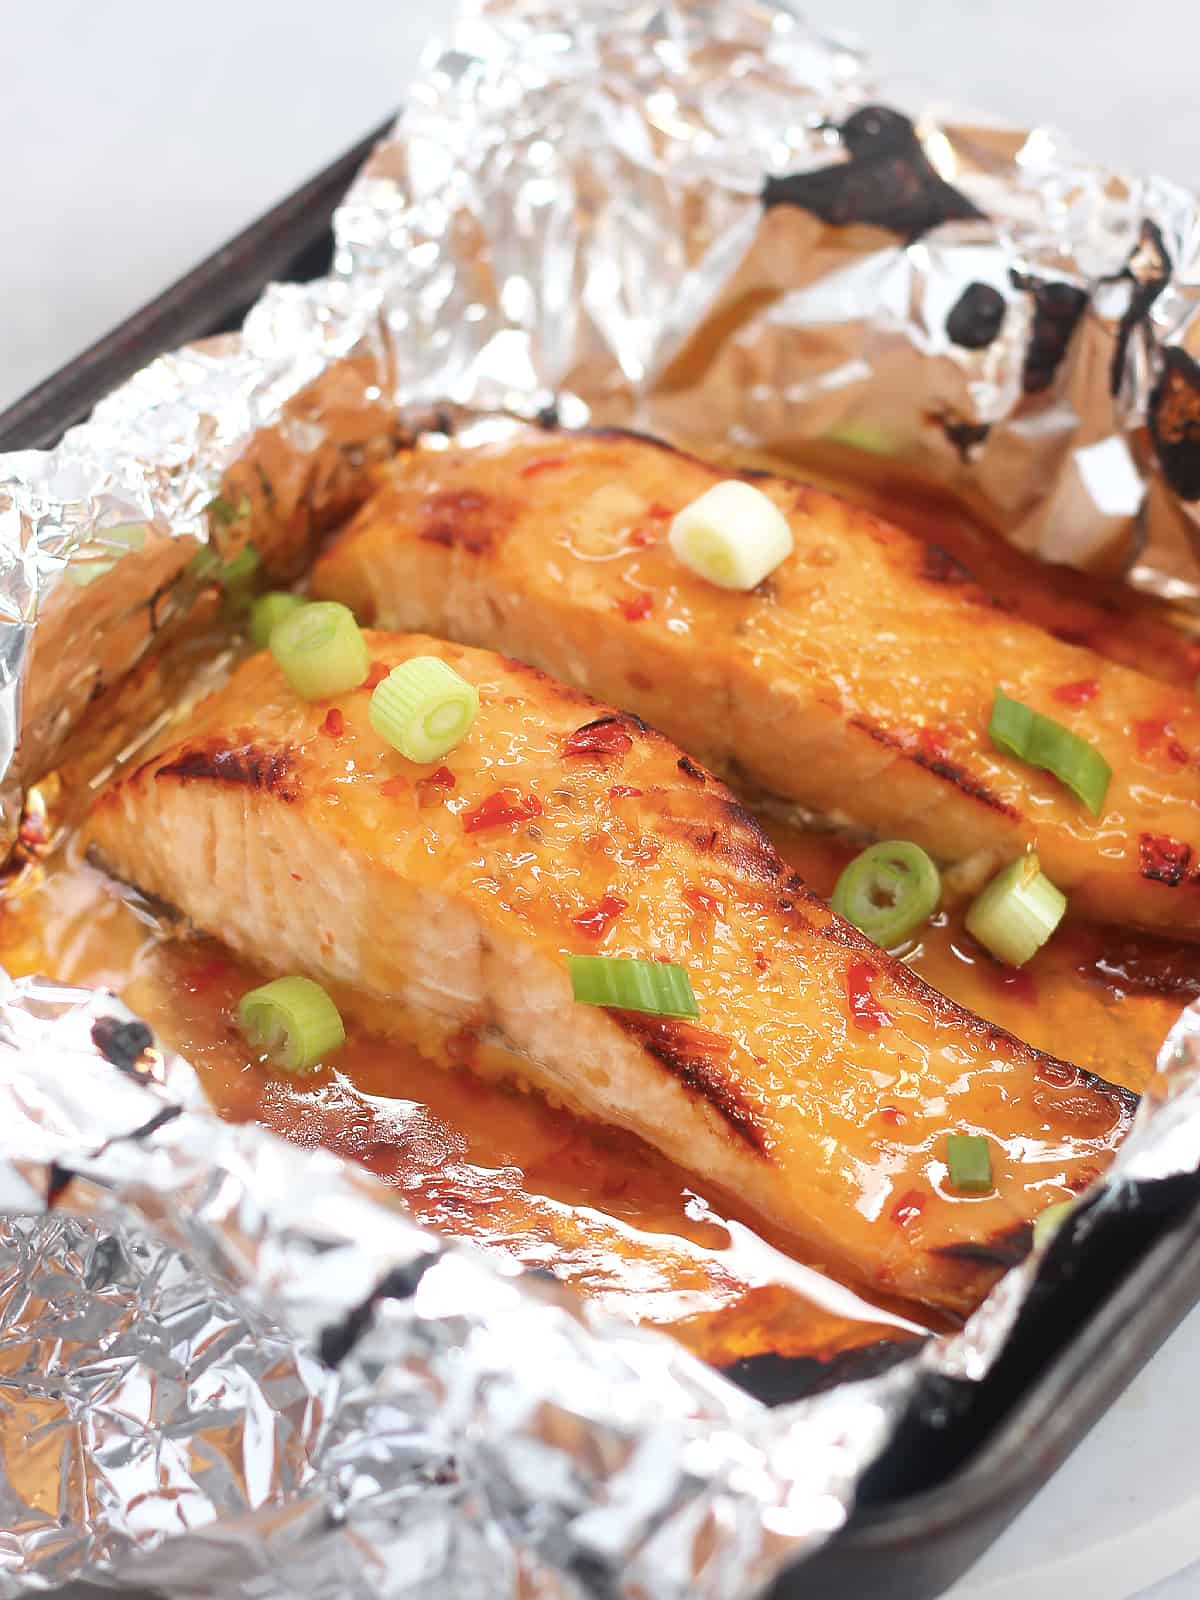 Two sweet chili salmon fillets in a foil lined tin, garnished with sliced green onions.